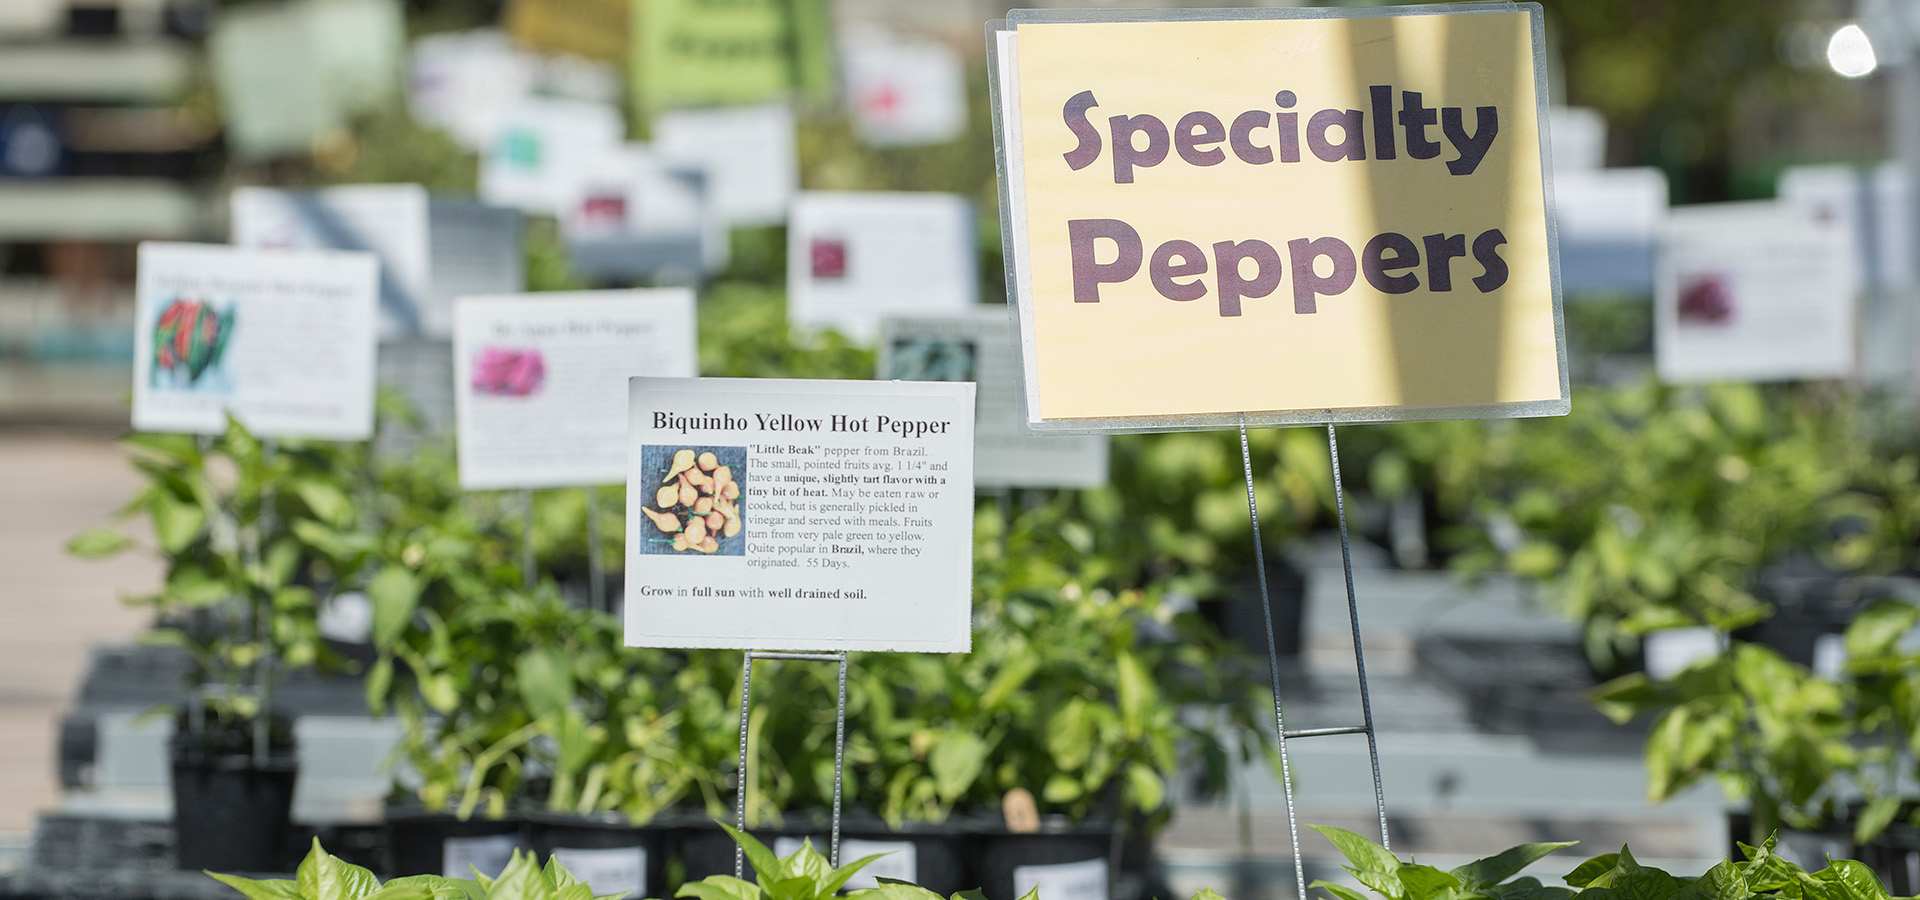 Pepper plants on sale at the Farm Store